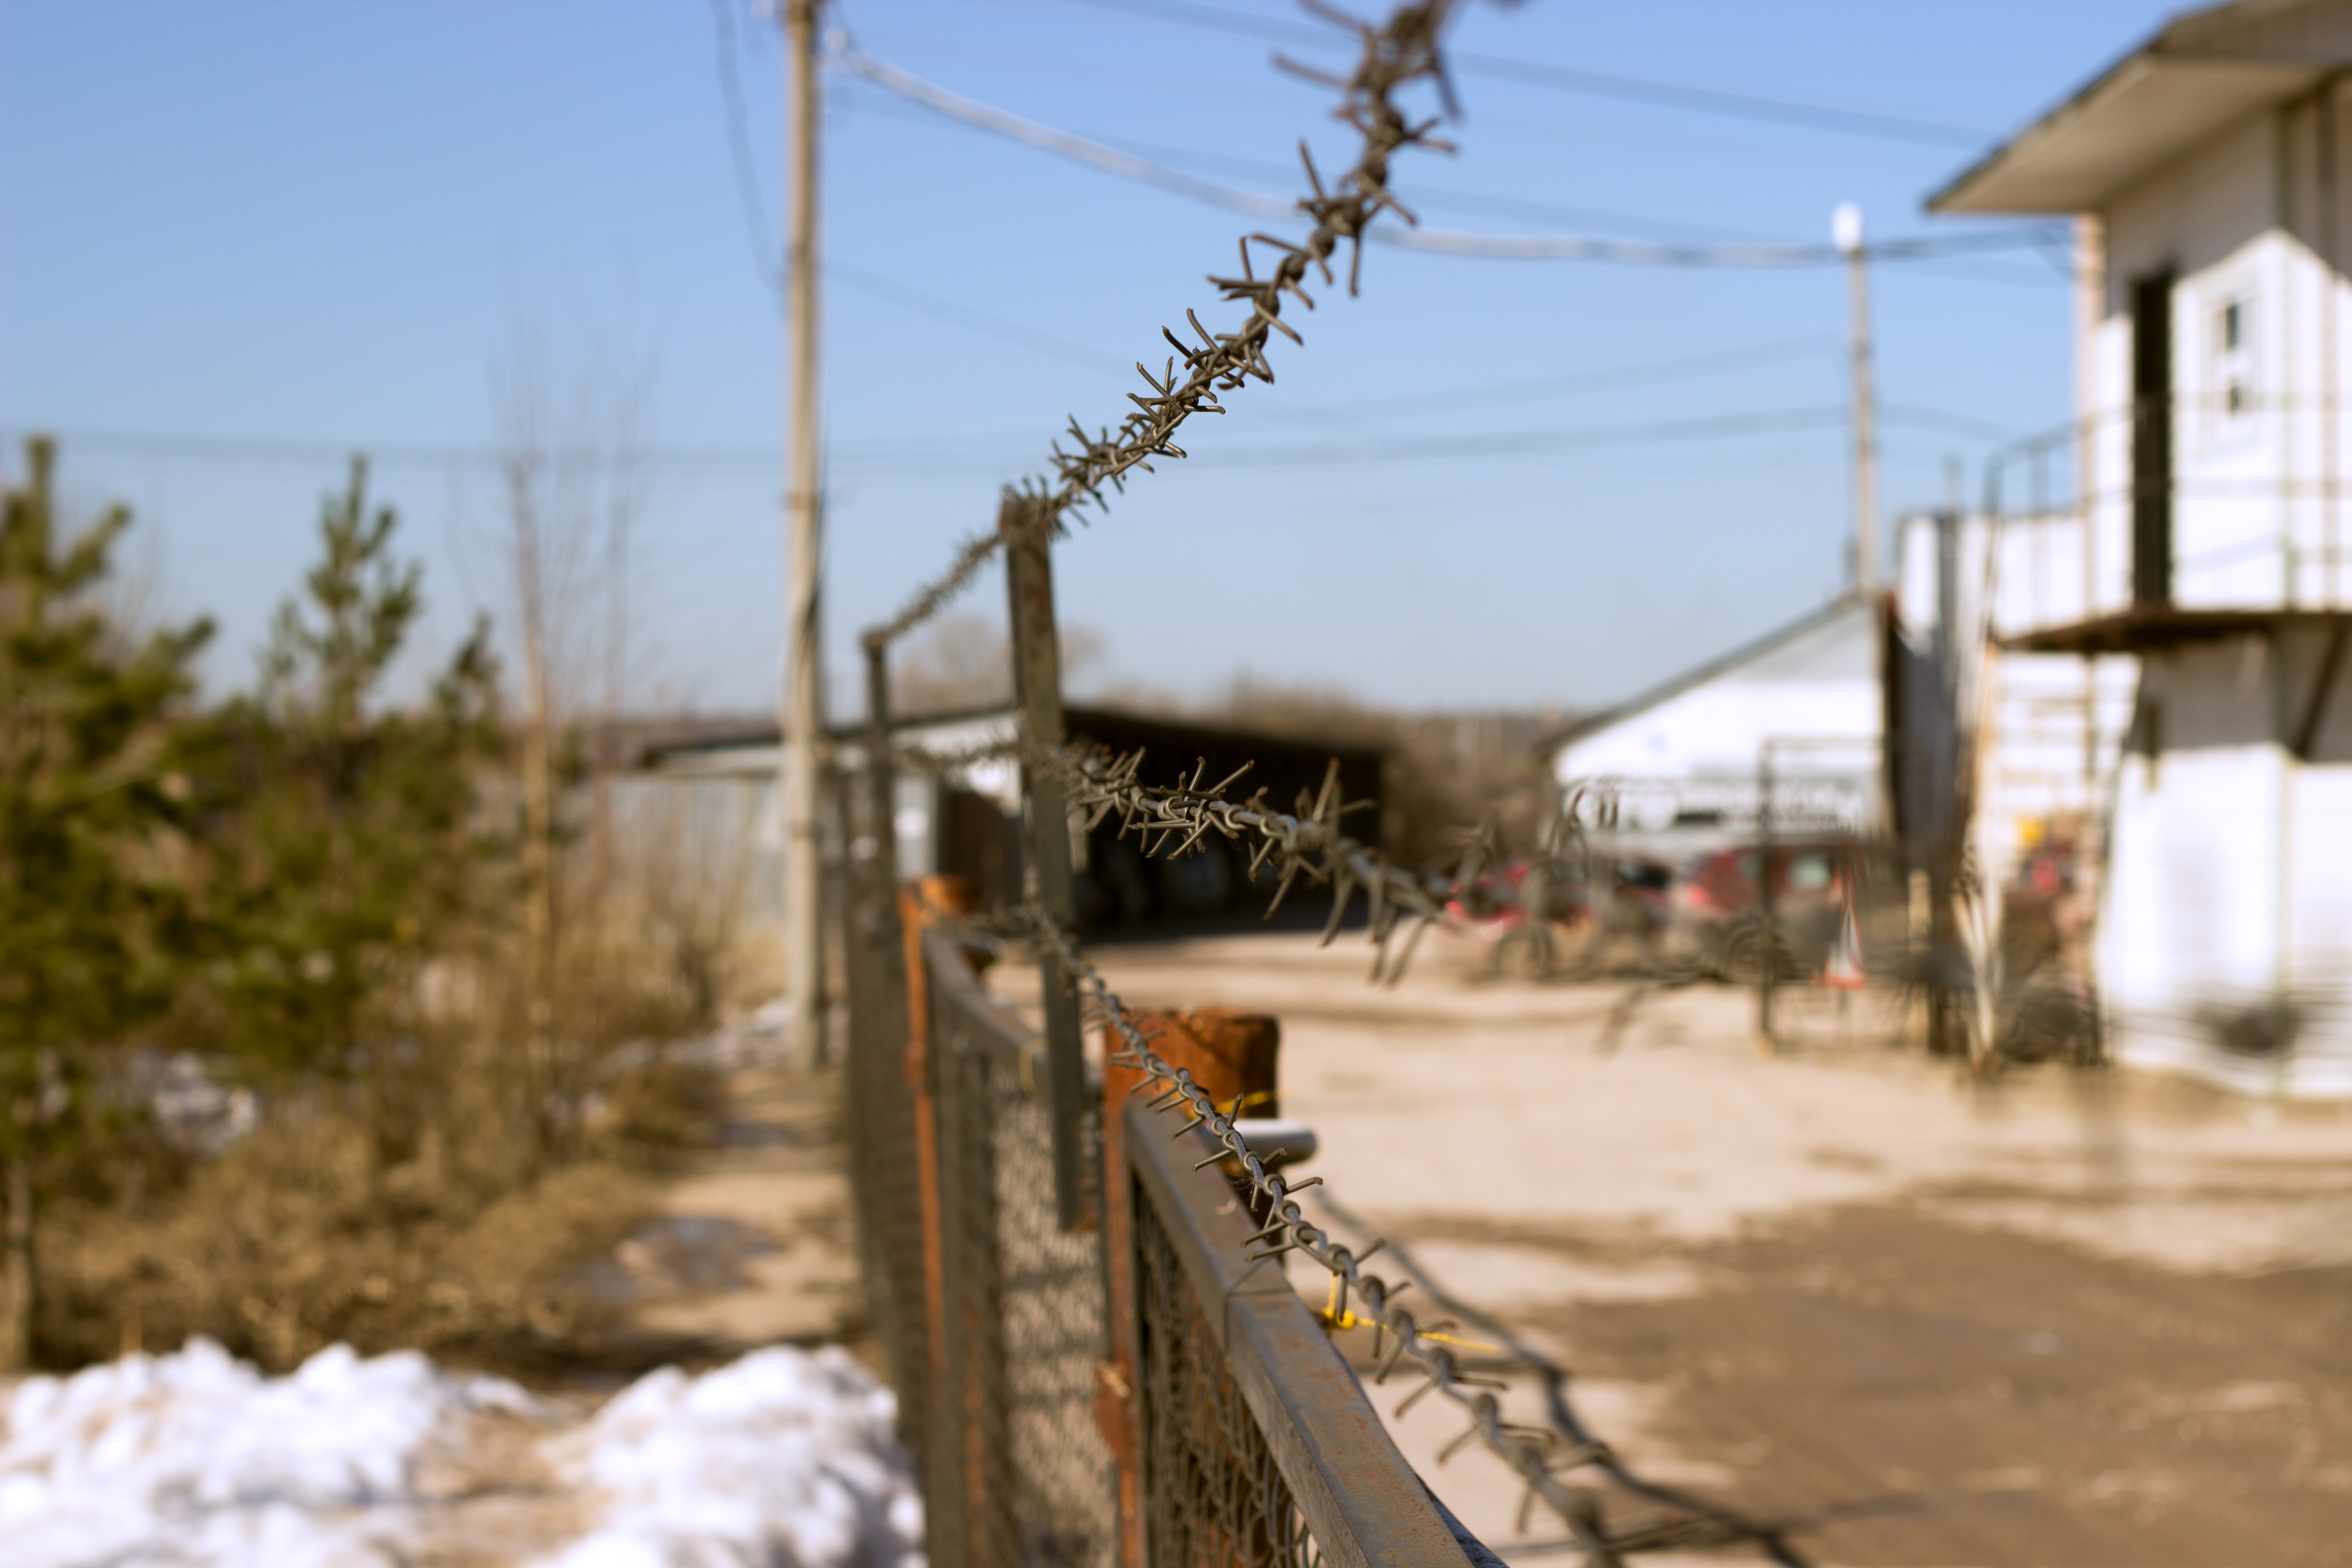 General 5184x3456 Russia urban barbed wire fence